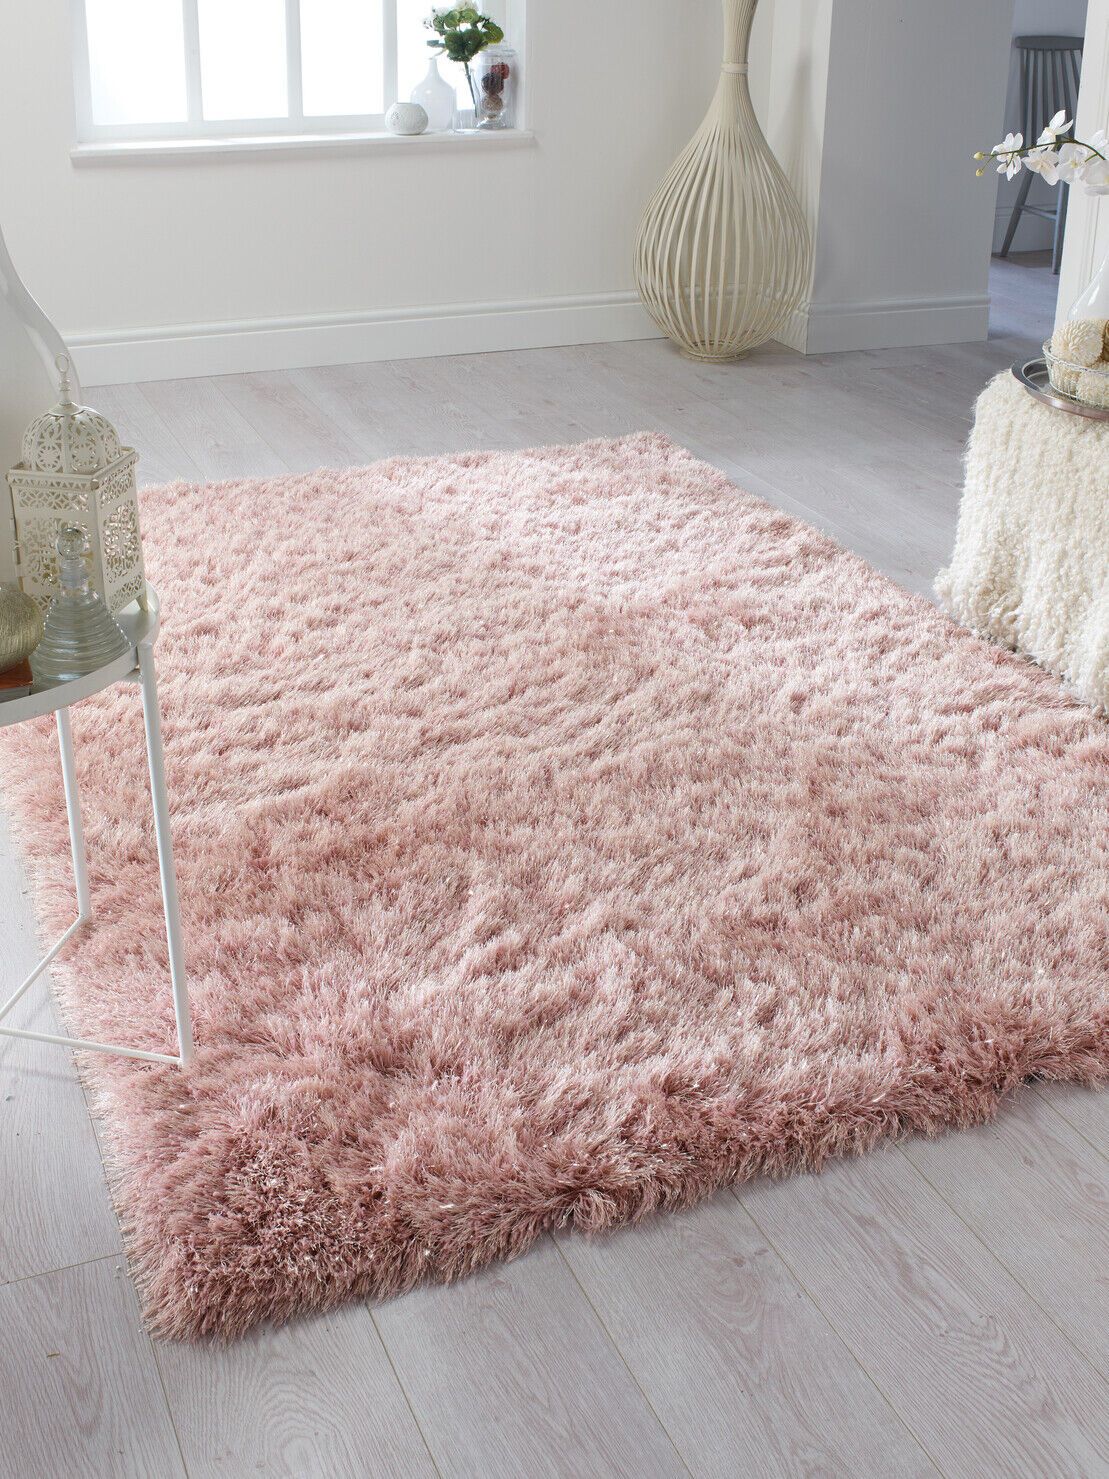 Dazzle Soft Fluffy Silky Shaggy Blush Pink Rug Bedroom Living Room Carpet |  Ebay Throughout Pink Soft Touch Shag Rugs (View 15 of 15)